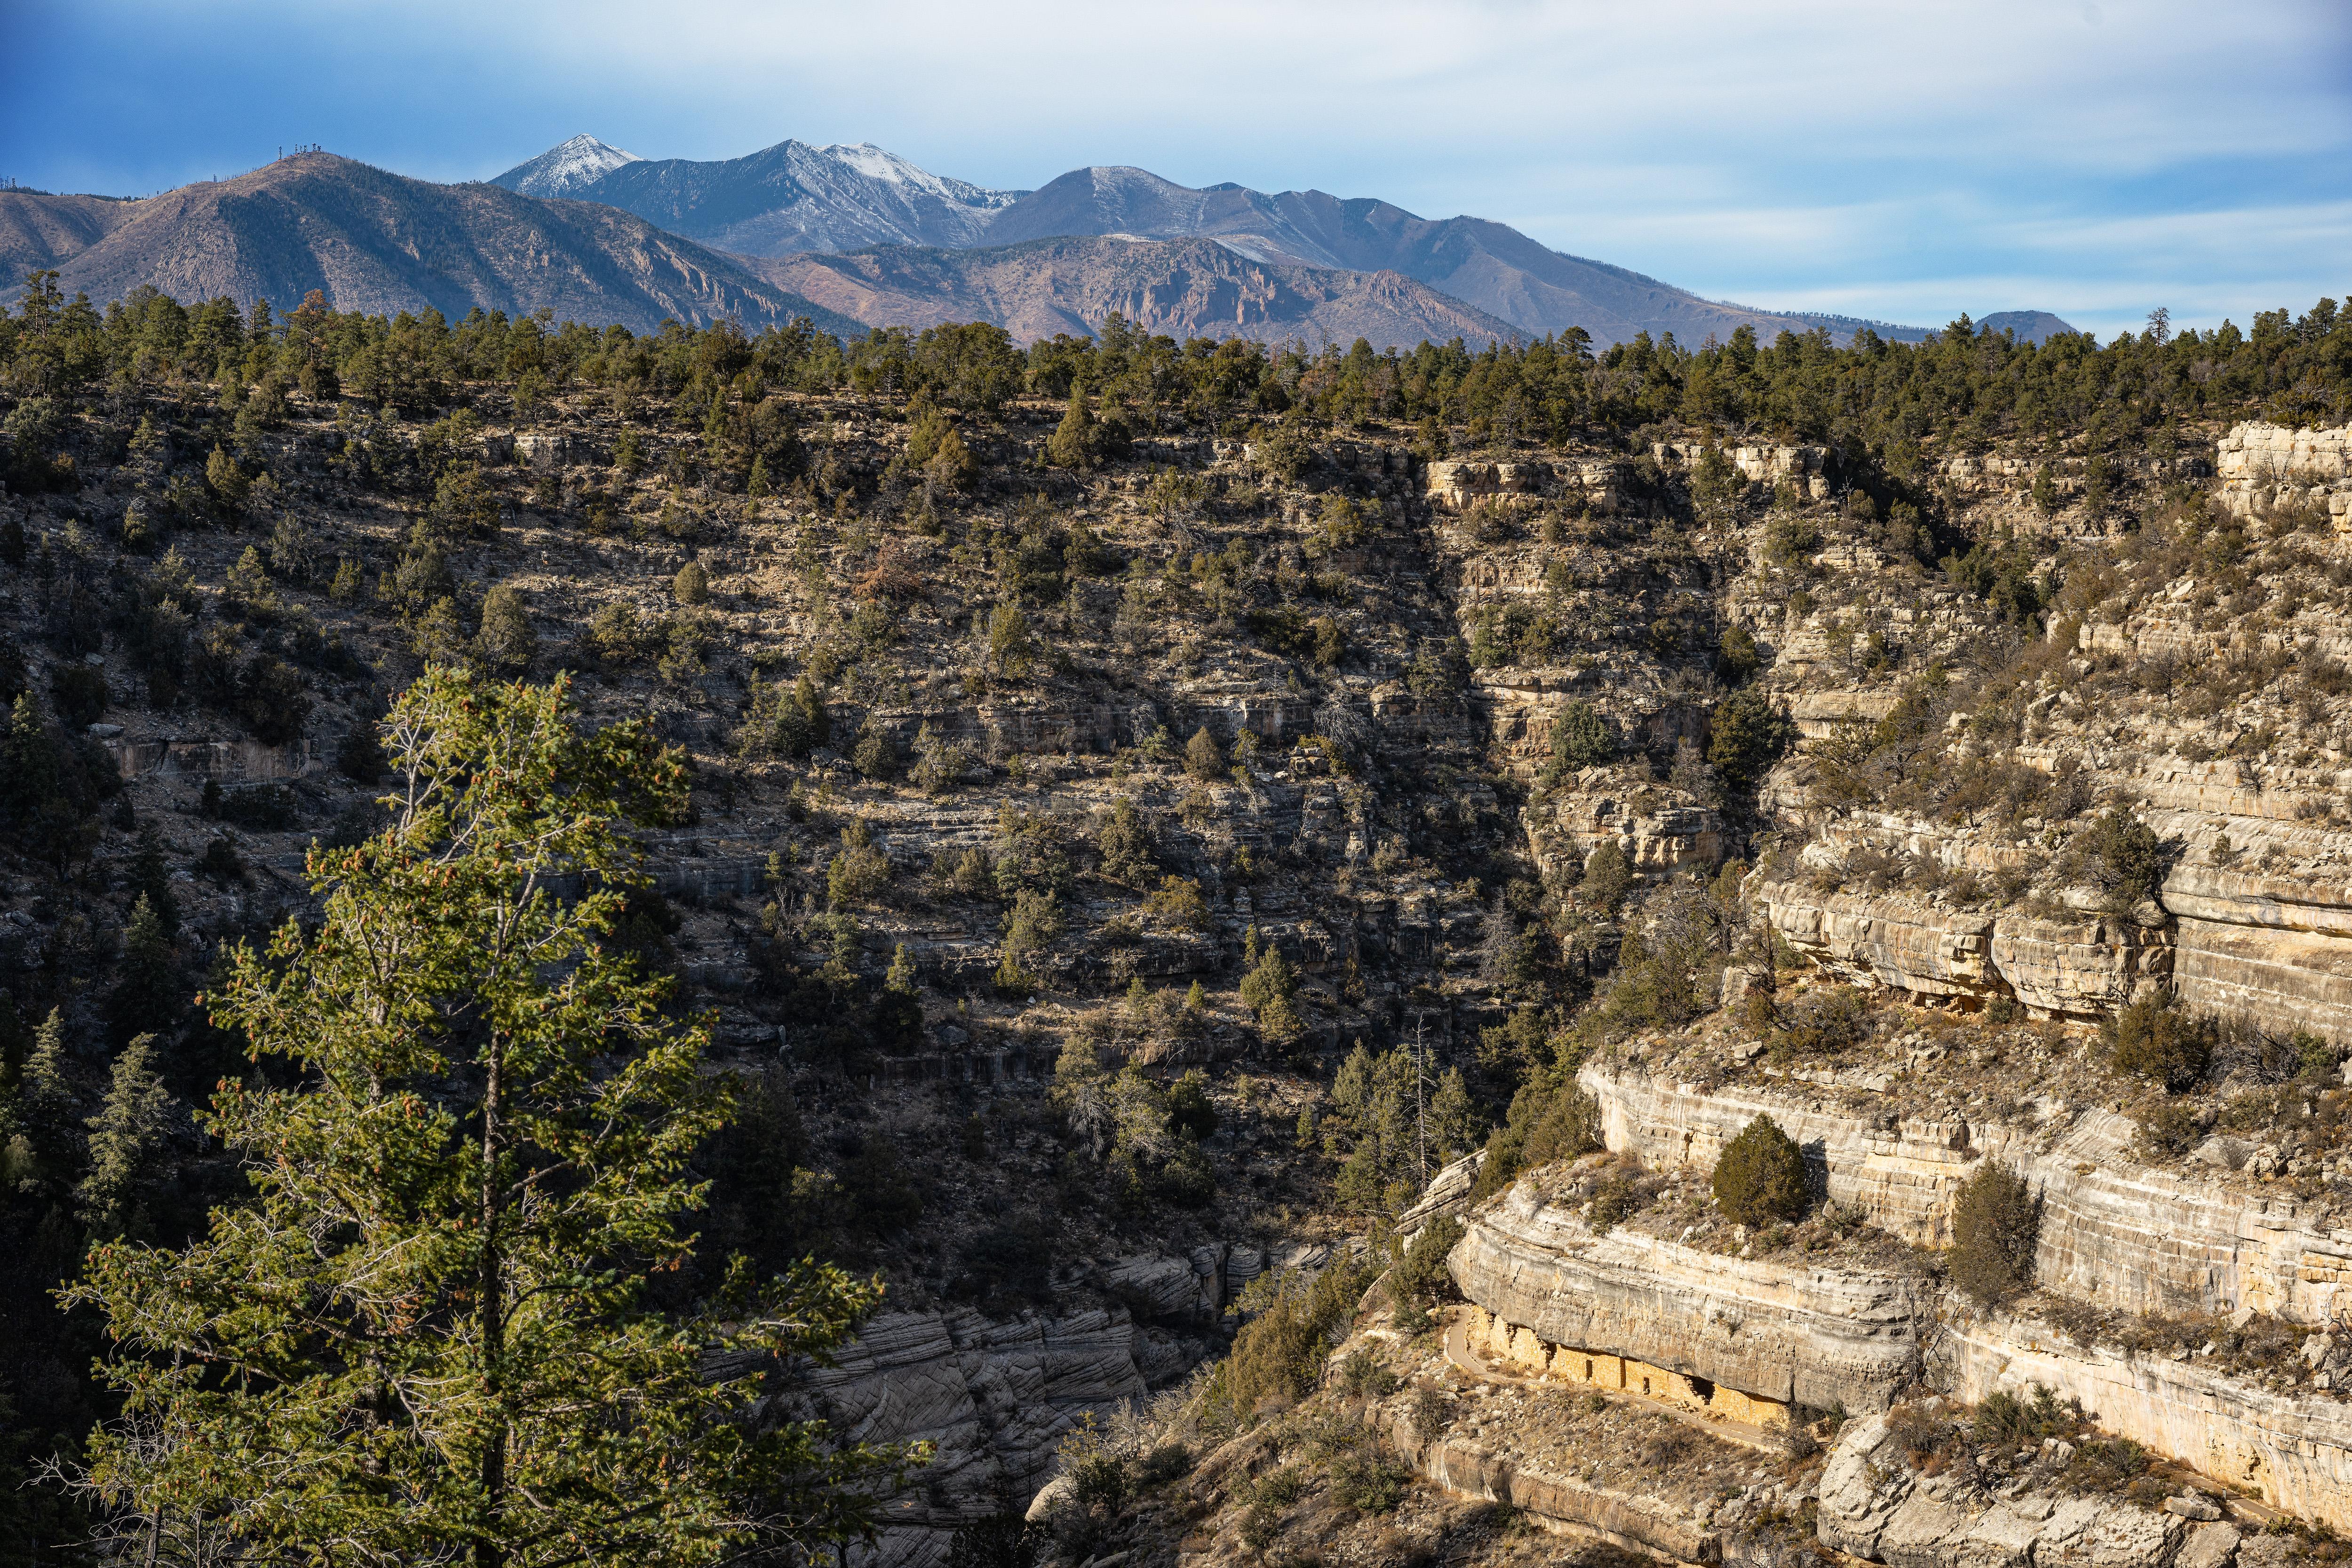 Walnut Canyon's cliff dwellings are illuminated by the afternoon sun.